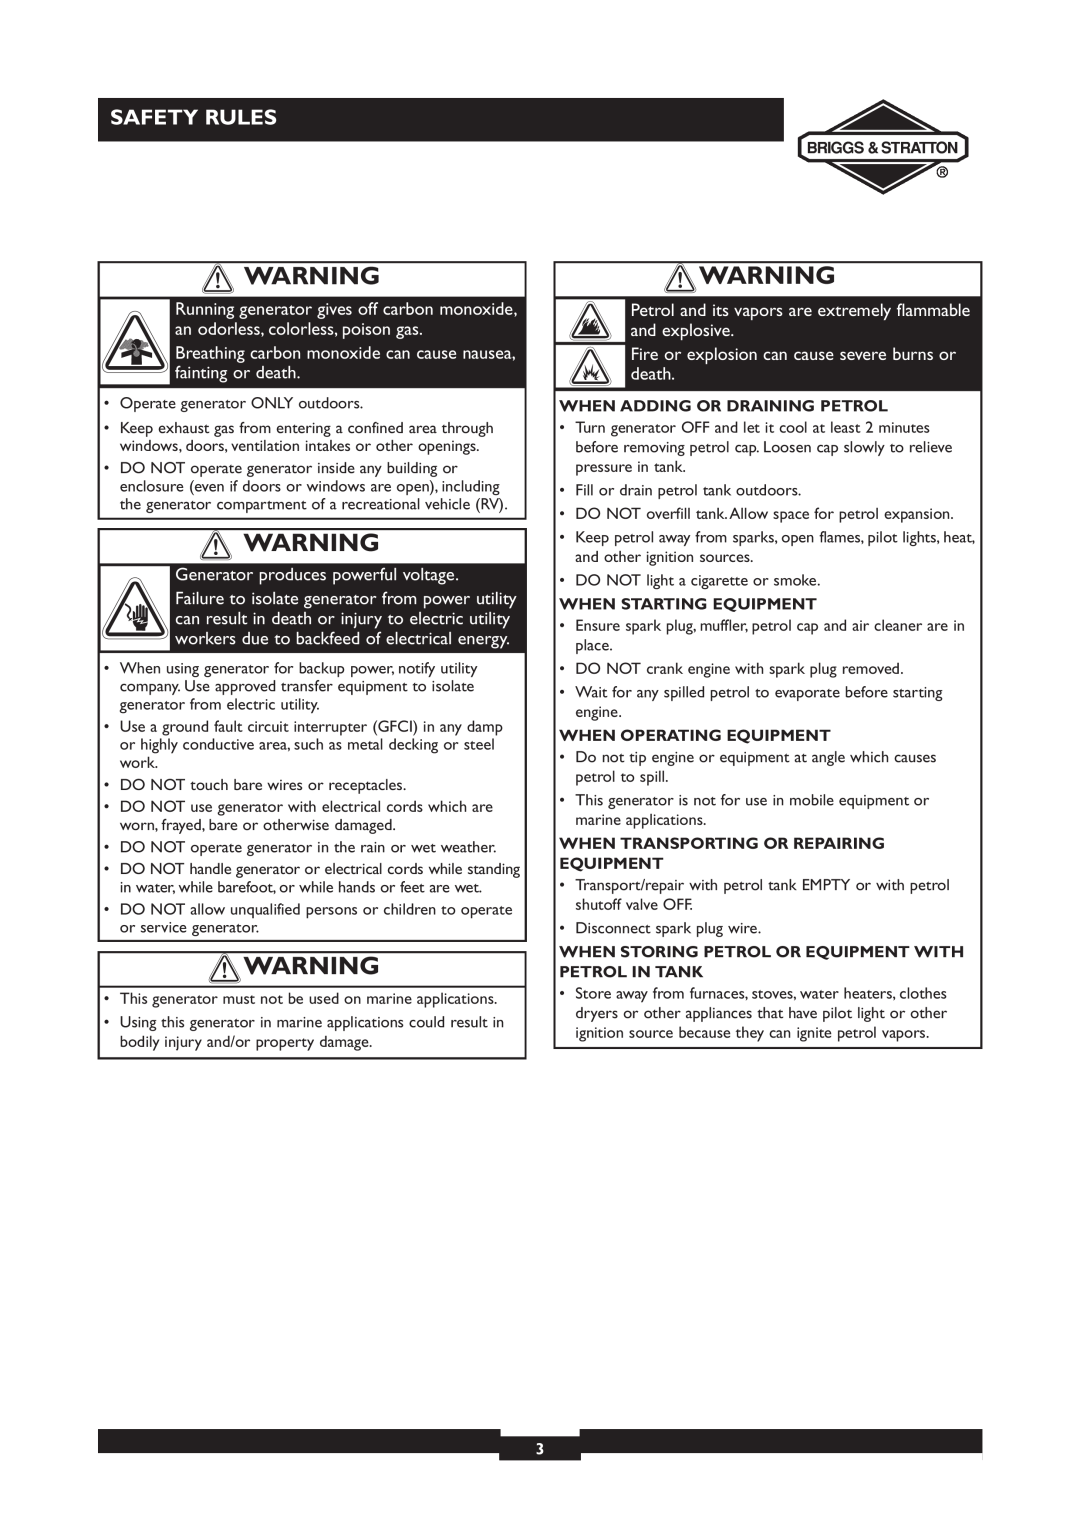 Briggs & Stratton 30231 Safety Rules, When Adding Or Draining Petrol, When Starting Equipment, When Operating Equipment 